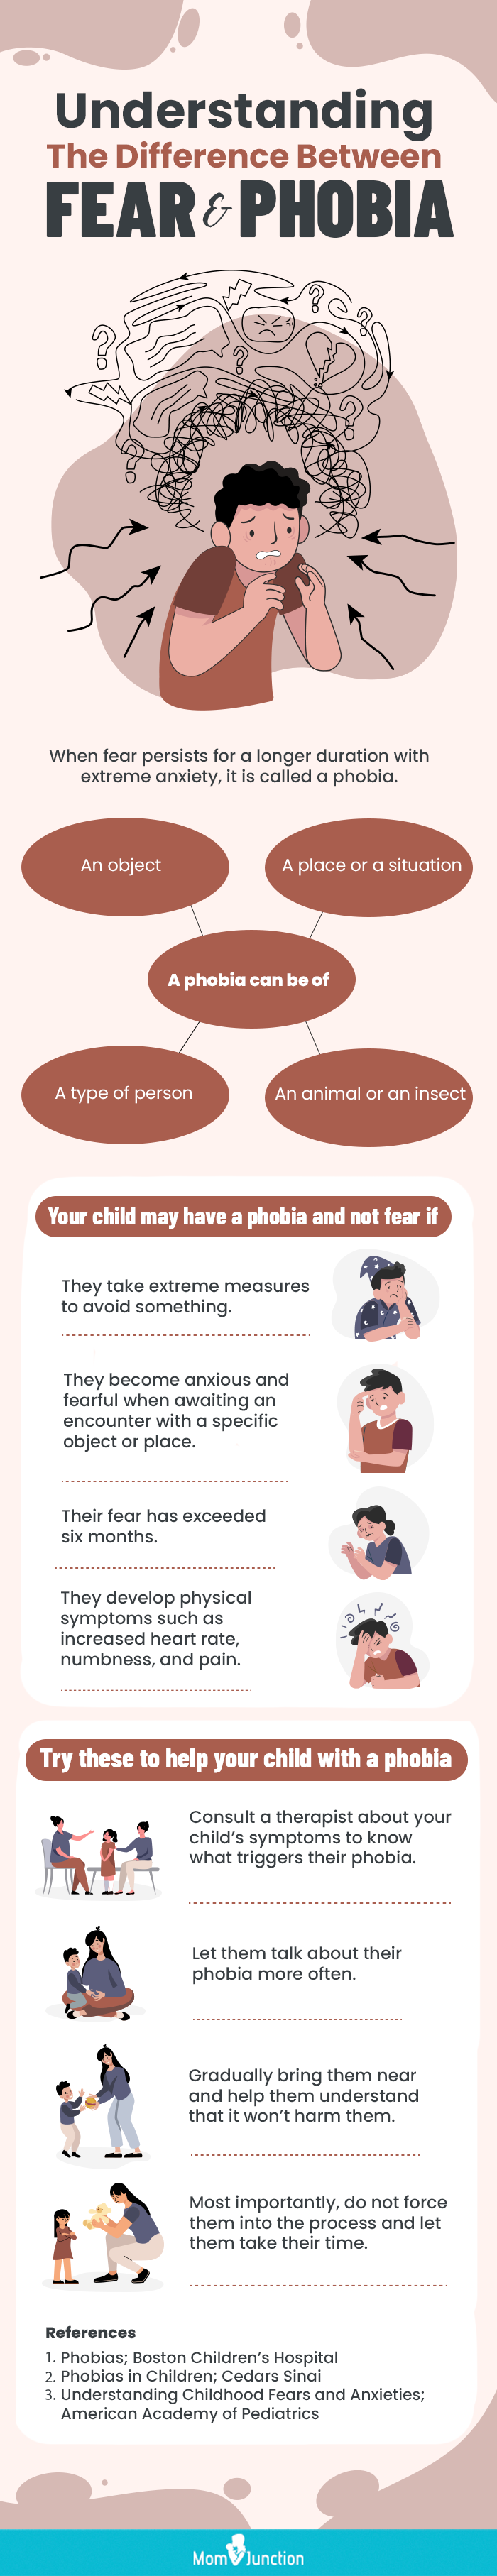 understanding the difference between fear and phobia (infographic)